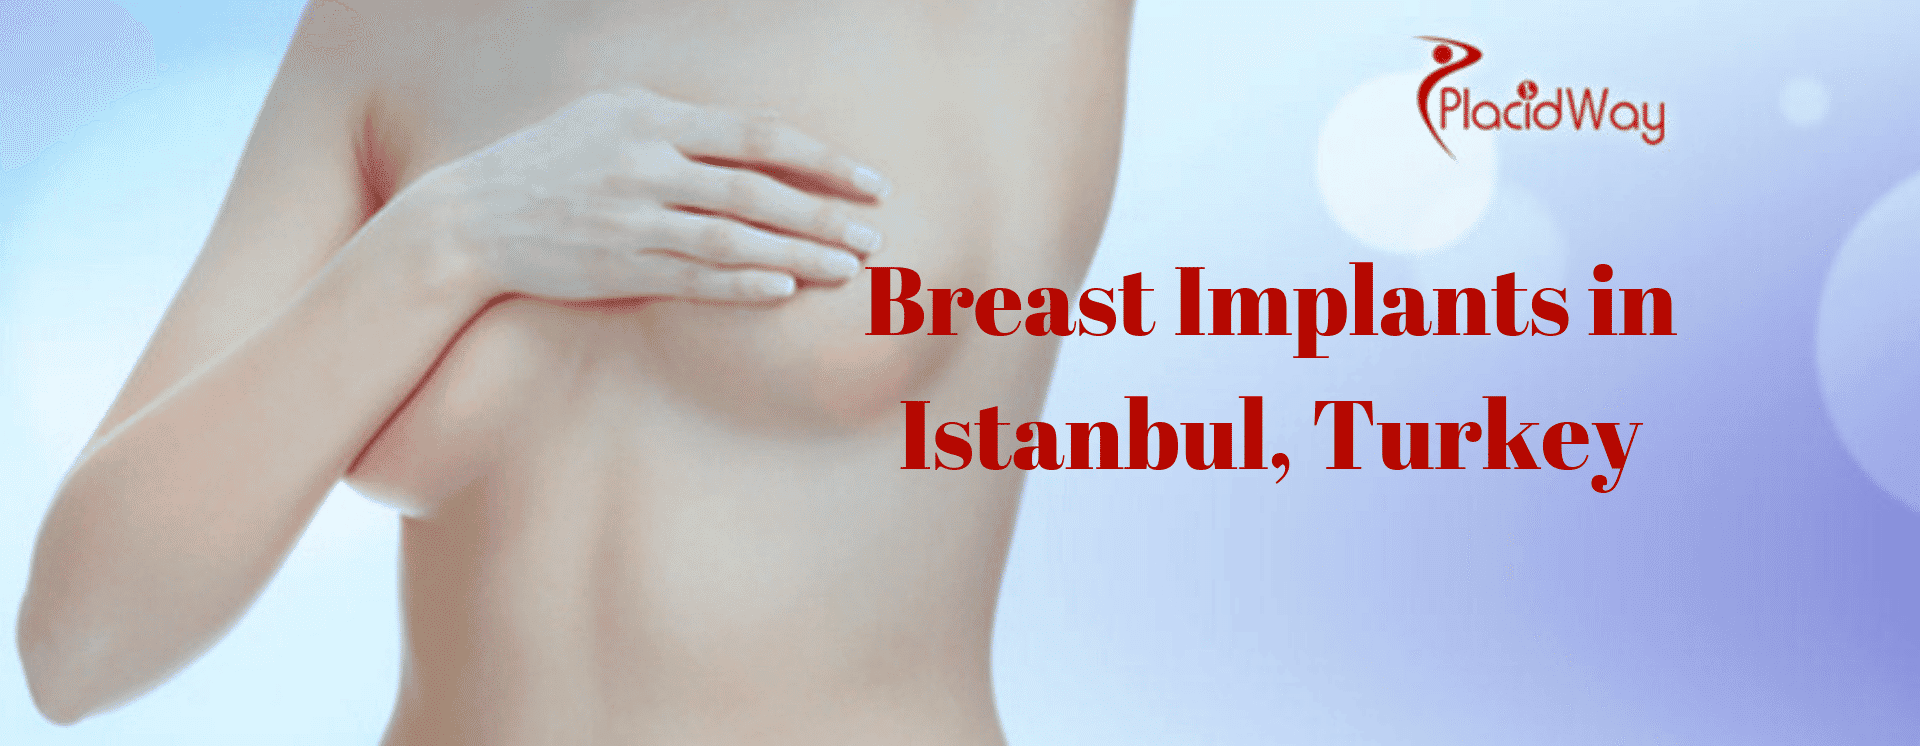 Most Popular Package for Breast Implants in Istanbul, Turkey